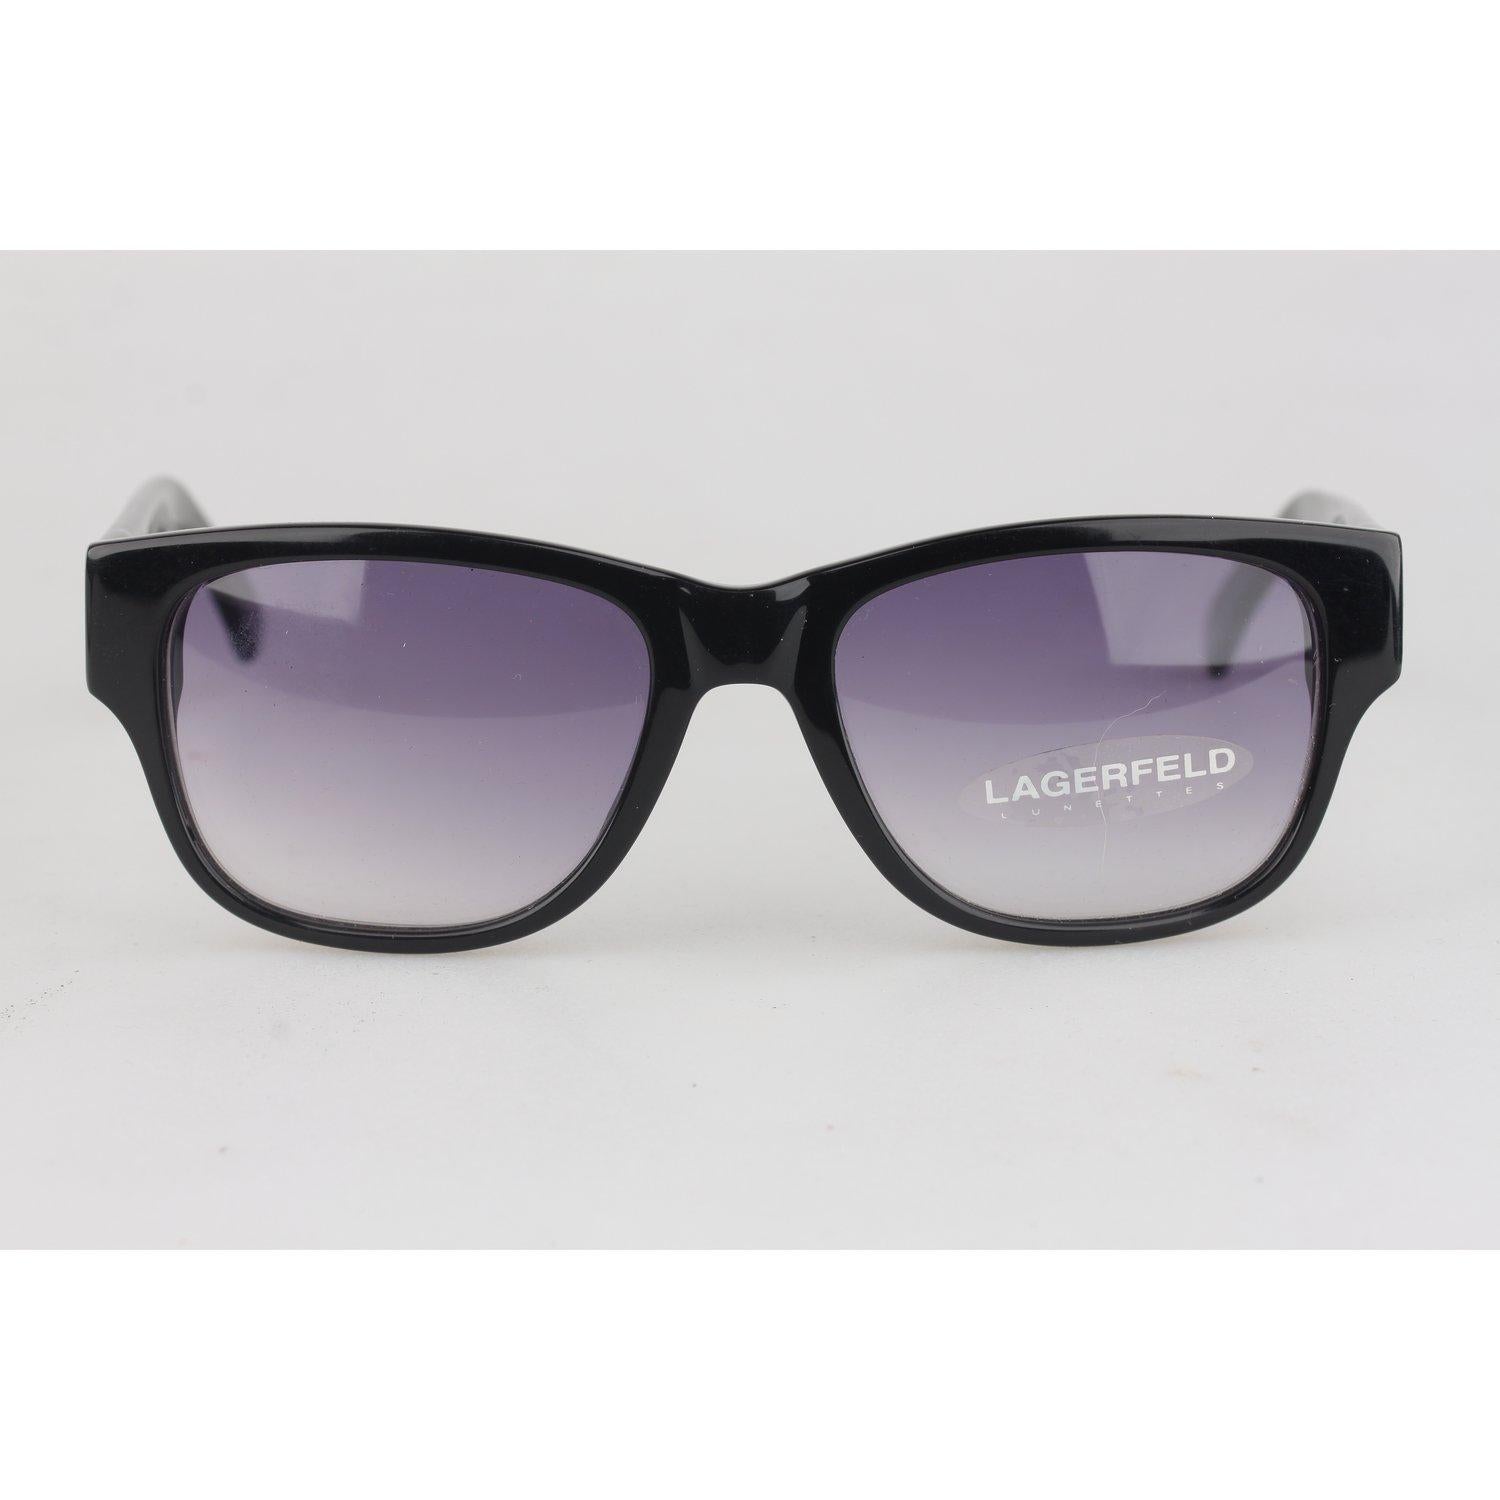 MATERIAL: Acetate COLOR: Black MODEL: Mod 4221 GENDER: Women SIZE: Medium COUNTRY OF MANUFACTURE: Italy Condition CONDITION DETAILS: NOS (NEW OLD STOCK) Never worn or Used- They will come with their original Lagerfeld hard case Measurements